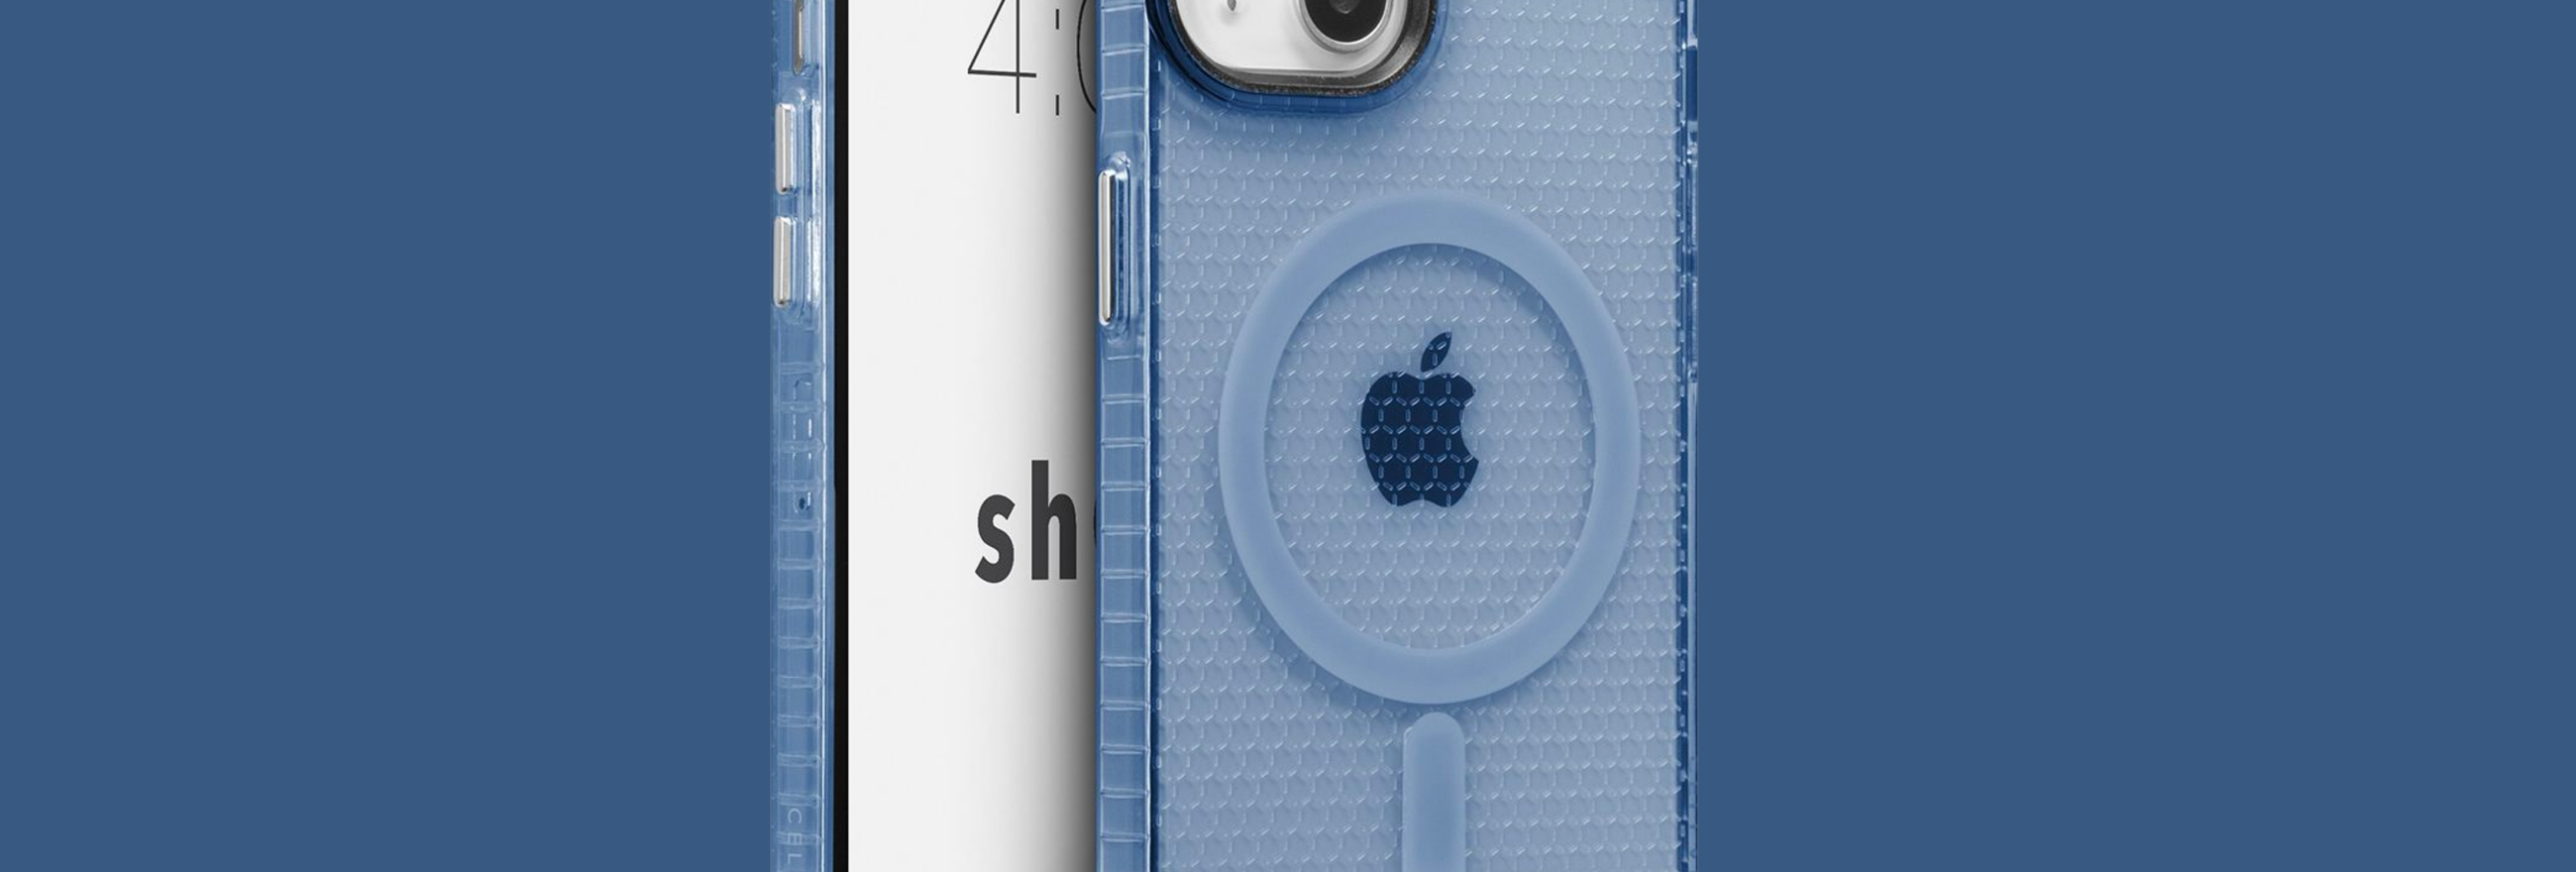 Apple iPhone 13 Pro Max/iPhone 12 Pro Max Silicone Case with MagSafe - Deep  Navy